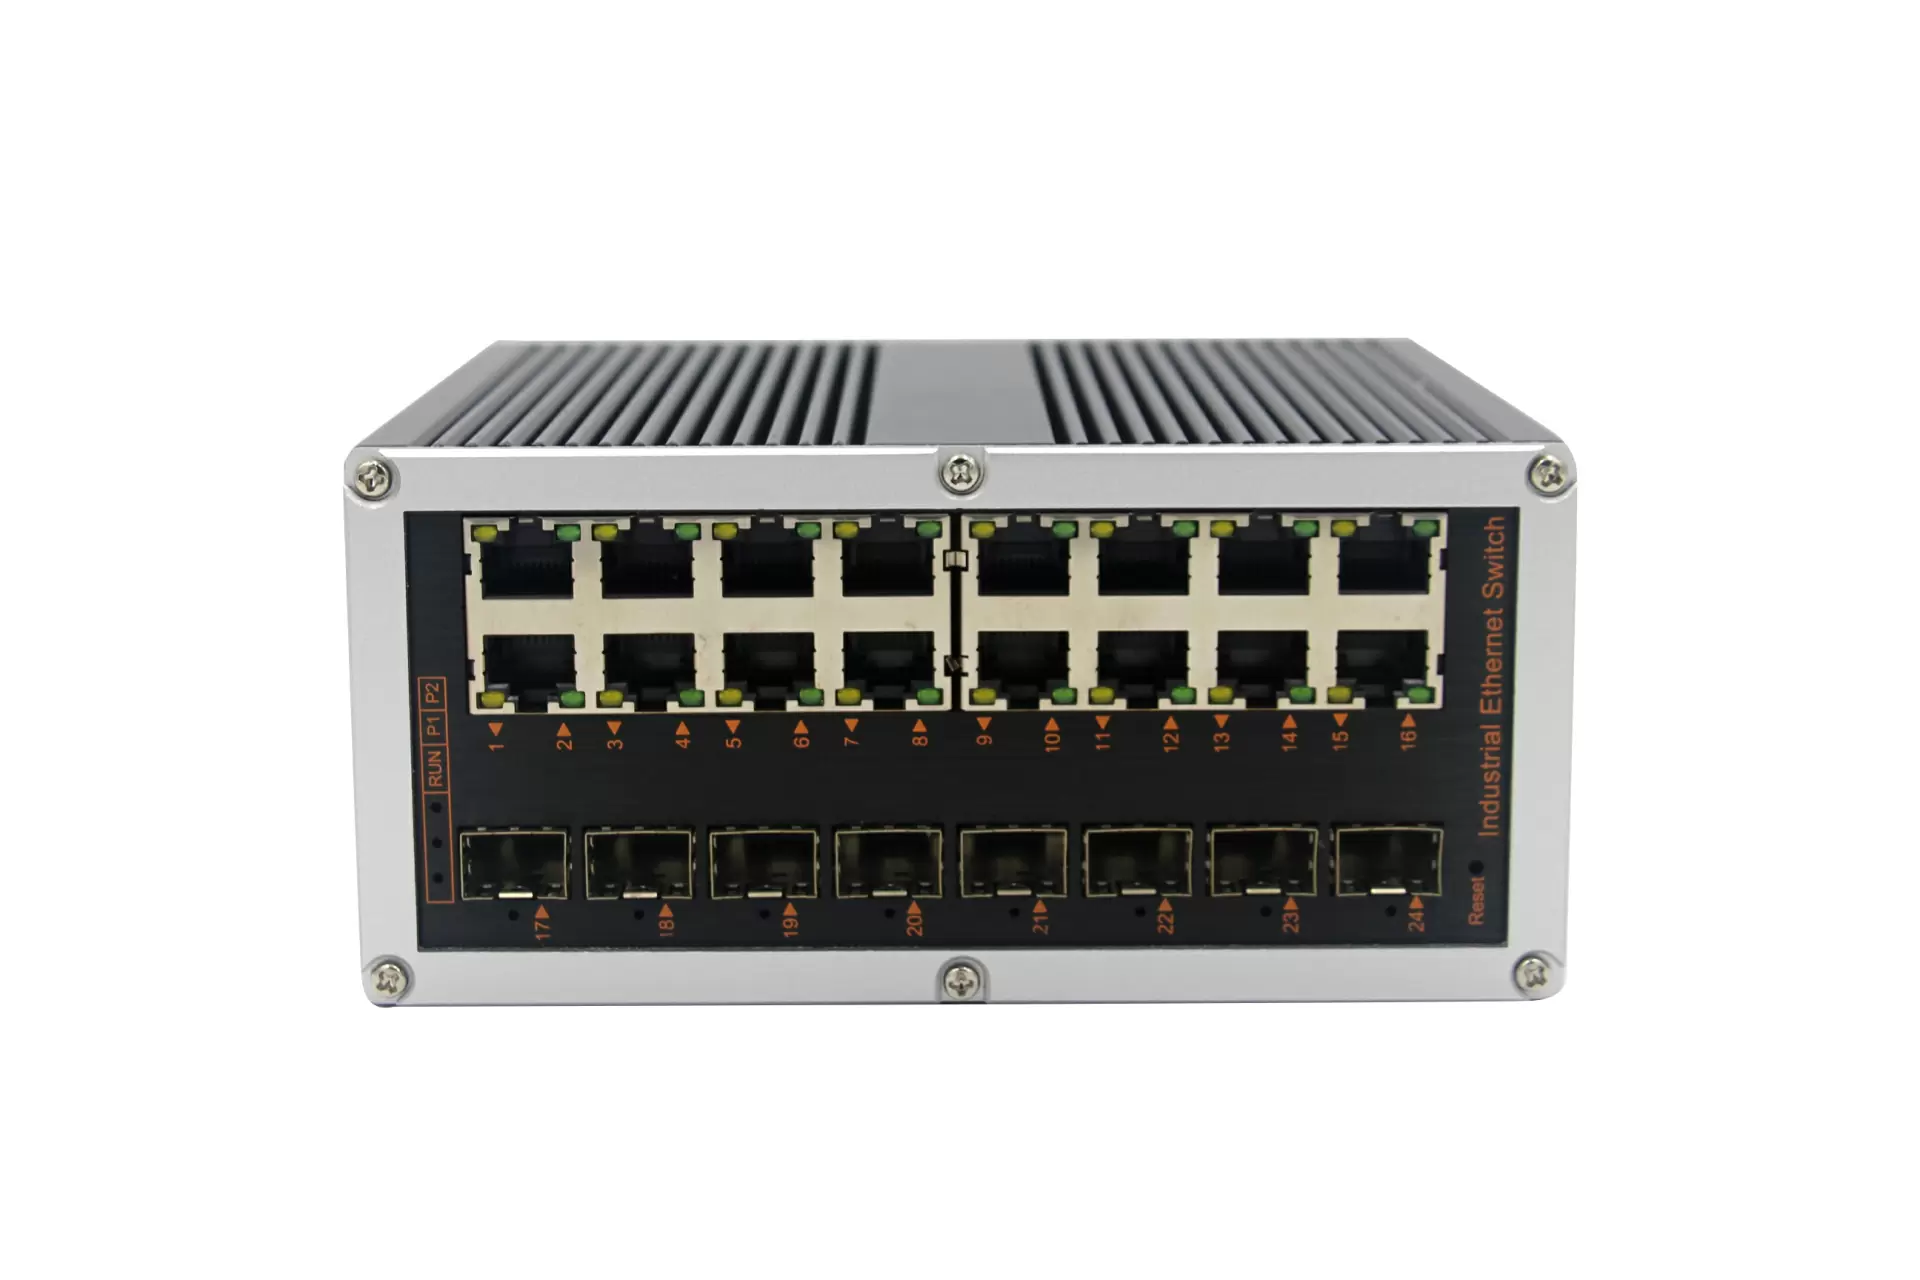 How Does a Port Ethernet Switch Facilitate Efficient Network Communication?